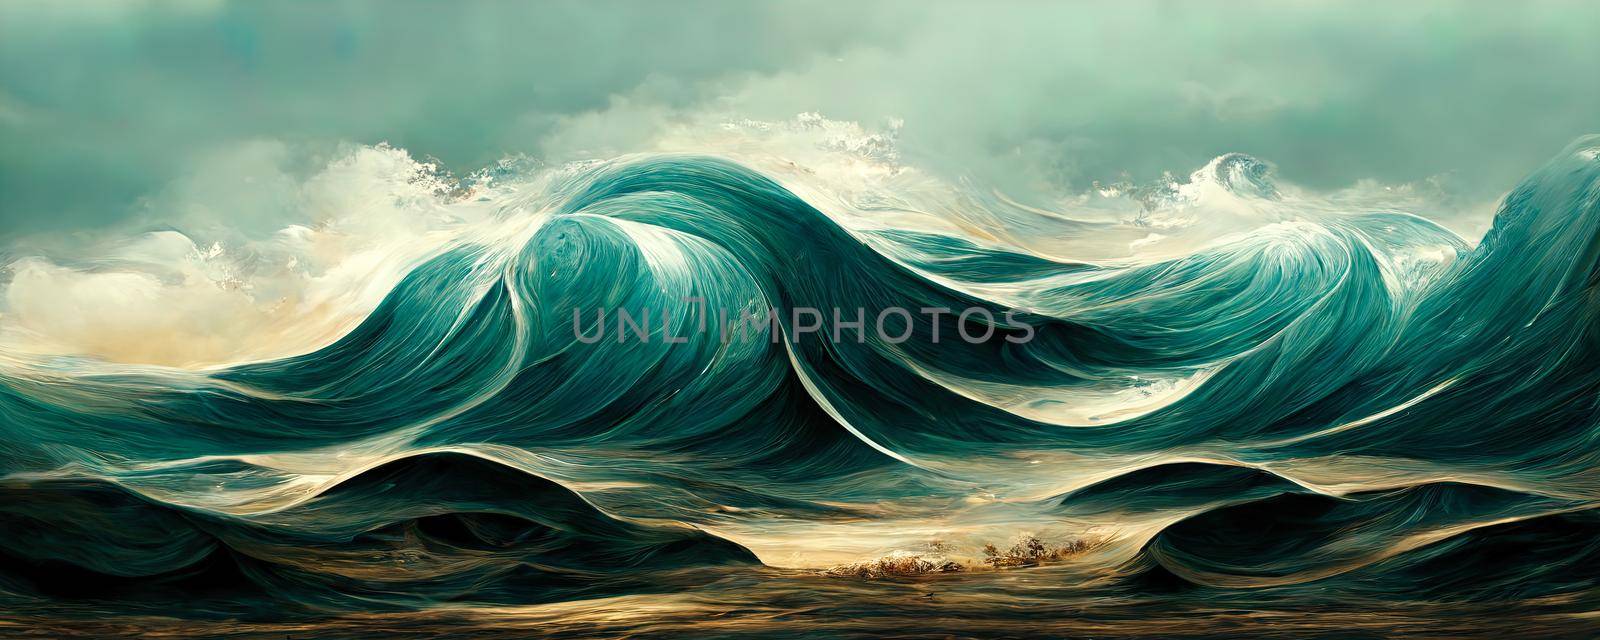 turquoise waves on the sea, Colorful abstract wallpaper texture background illustration by TRMK